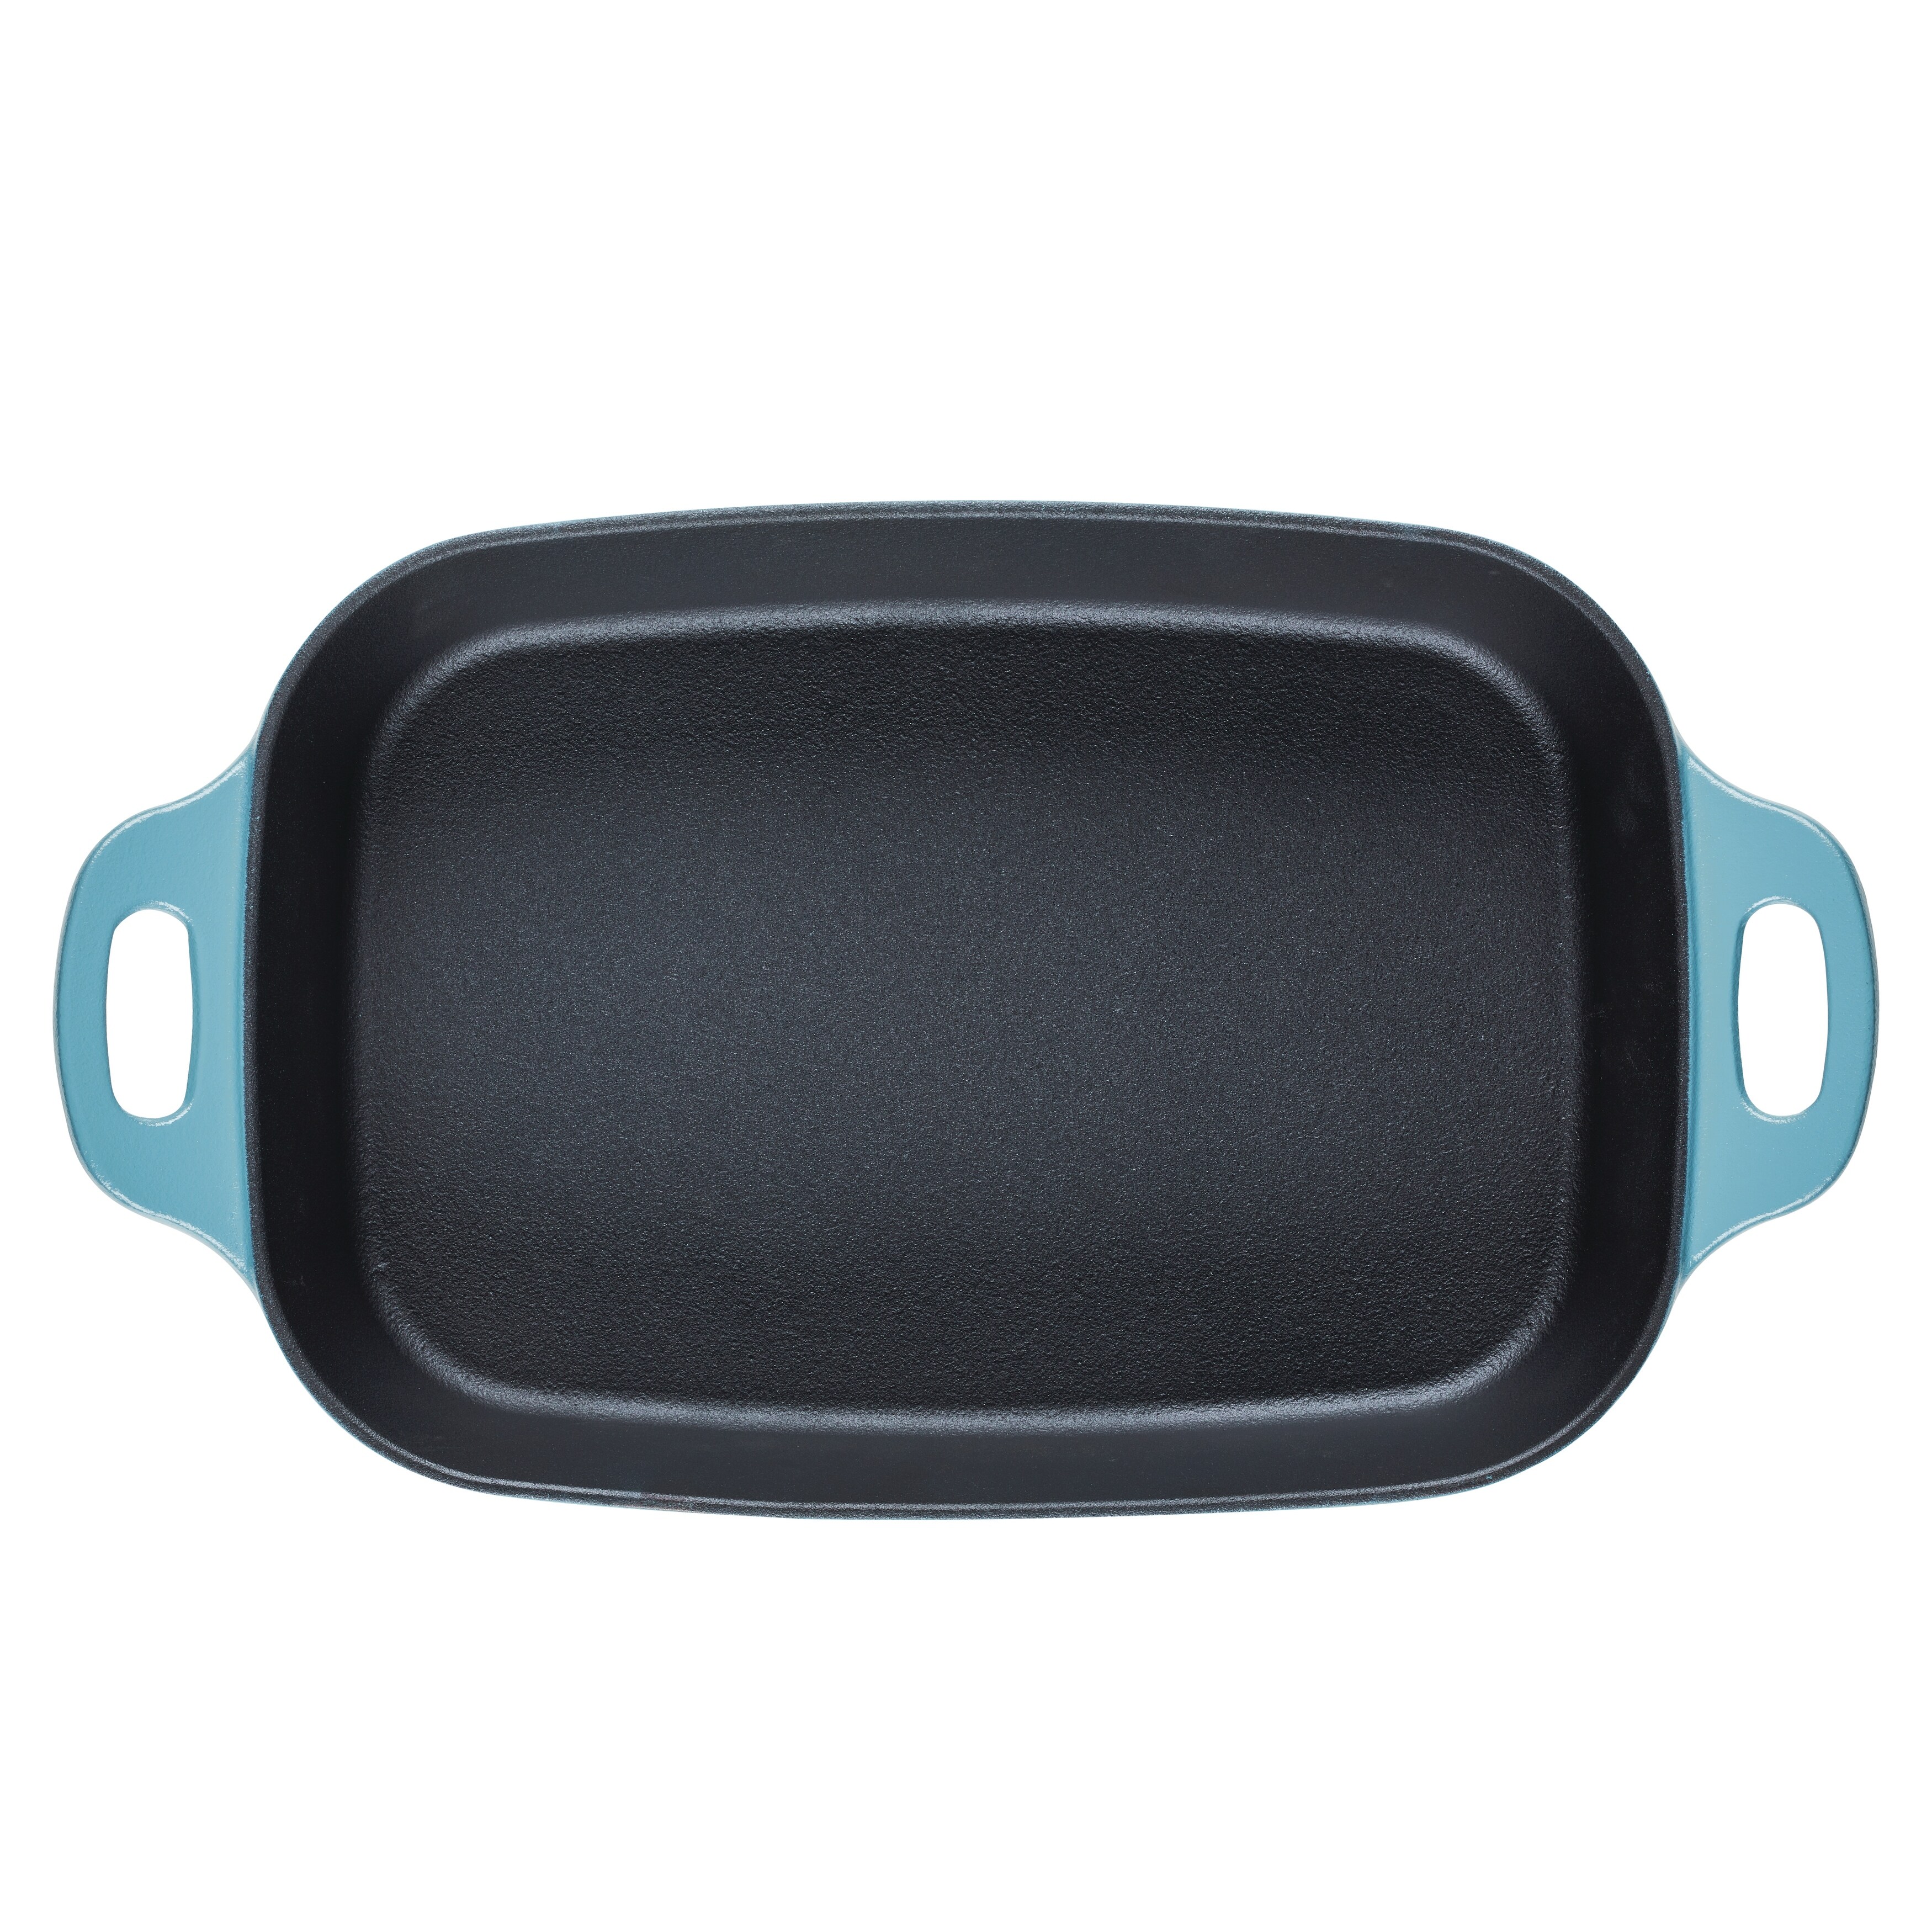 https://ak1.ostkcdn.com/images/products/is/images/direct/d031b2a5840aaa0031713c27a19f93baf8446ef8/Rachael-Ray-NITRO-Cast-Iron-Roasting-Pan%2C-9-Inch-x-13-Inch%2C-Agave-Blue.jpg